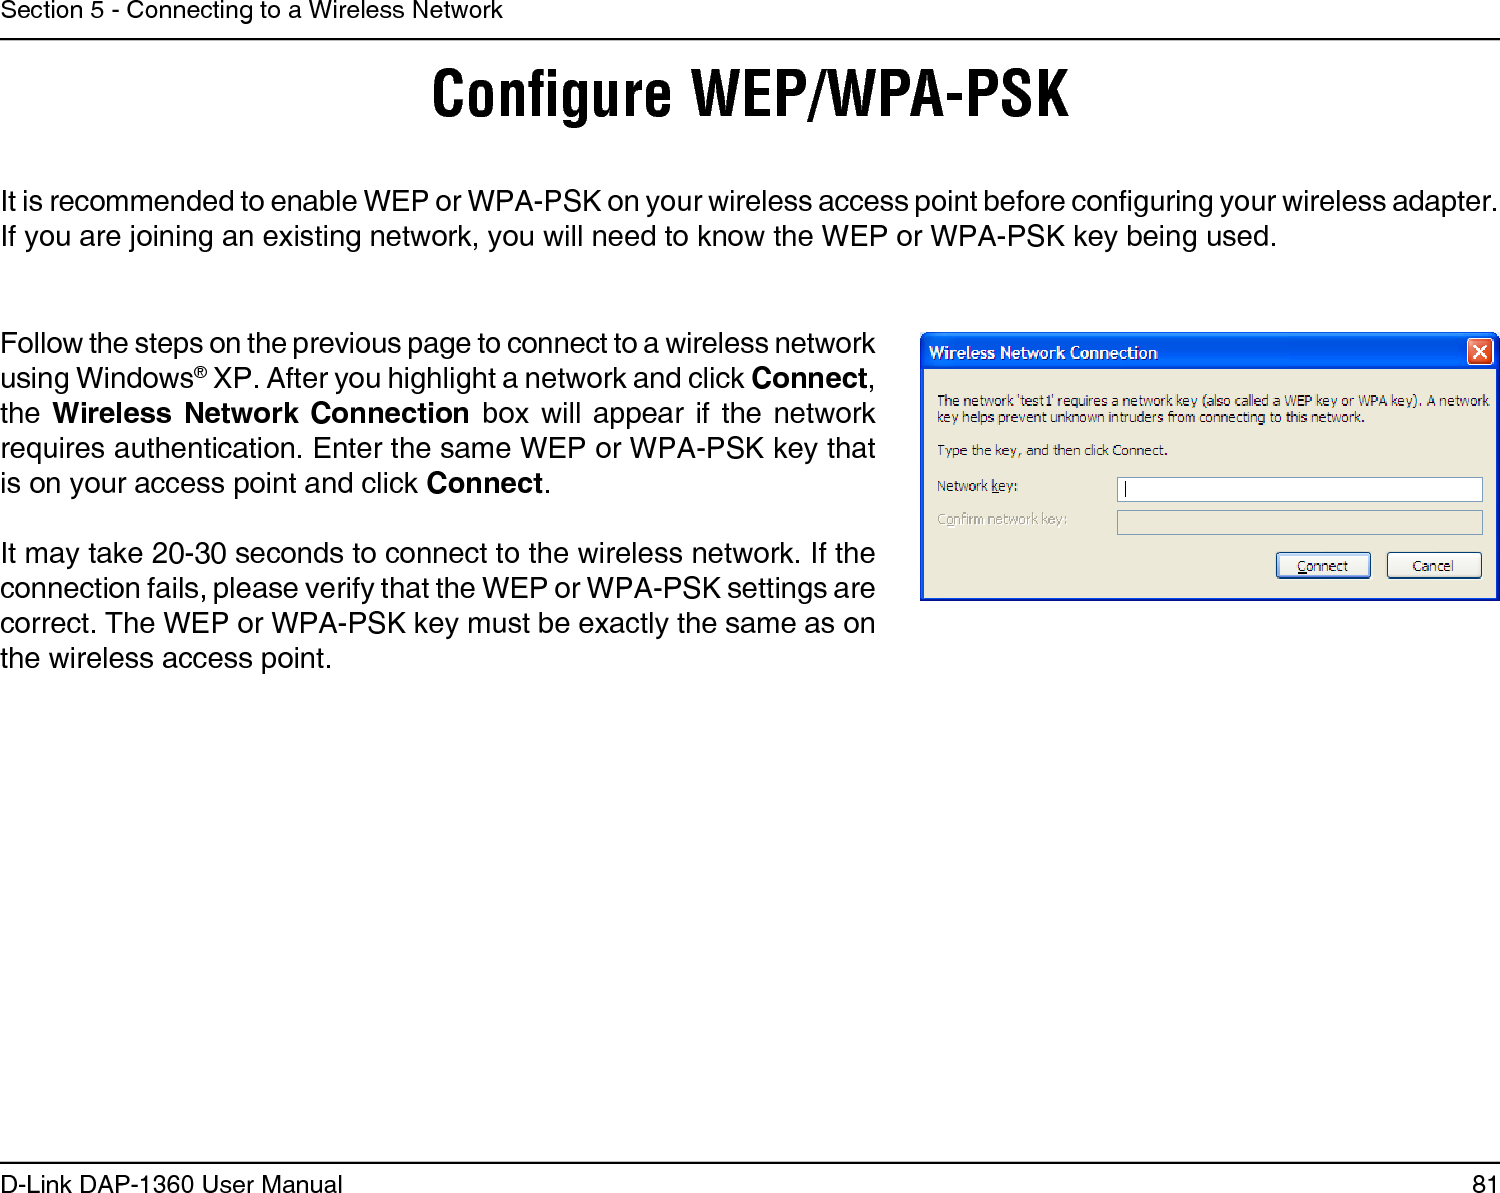 81D-Link DAP-1360 User ManualSection 5 - Connecting to a Wireless NetworkConﬁgure WEP/WPA-PSKIt is recommended to enable WEP or WPA-PSK on your wireless access point before conguring your wireless adapter. If you are joining an existing network, you will need to know the WEP or WPA-PSK key being used.Follow the steps on the previous page to connect to a wireless network using Windows® XP. After you highlight a network and click Connect, the Wireless Network Connection box will appear if the  network requires authentication. Enter the same WEP or WPA-PSK key that is on your access point and click Connect.It may take 20-30 seconds to connect to the wireless network. If the connection fails, please verify that the WEP or WPA-PSK settings are correct. The WEP or WPA-PSK key must be exactly the same as on the wireless access point.